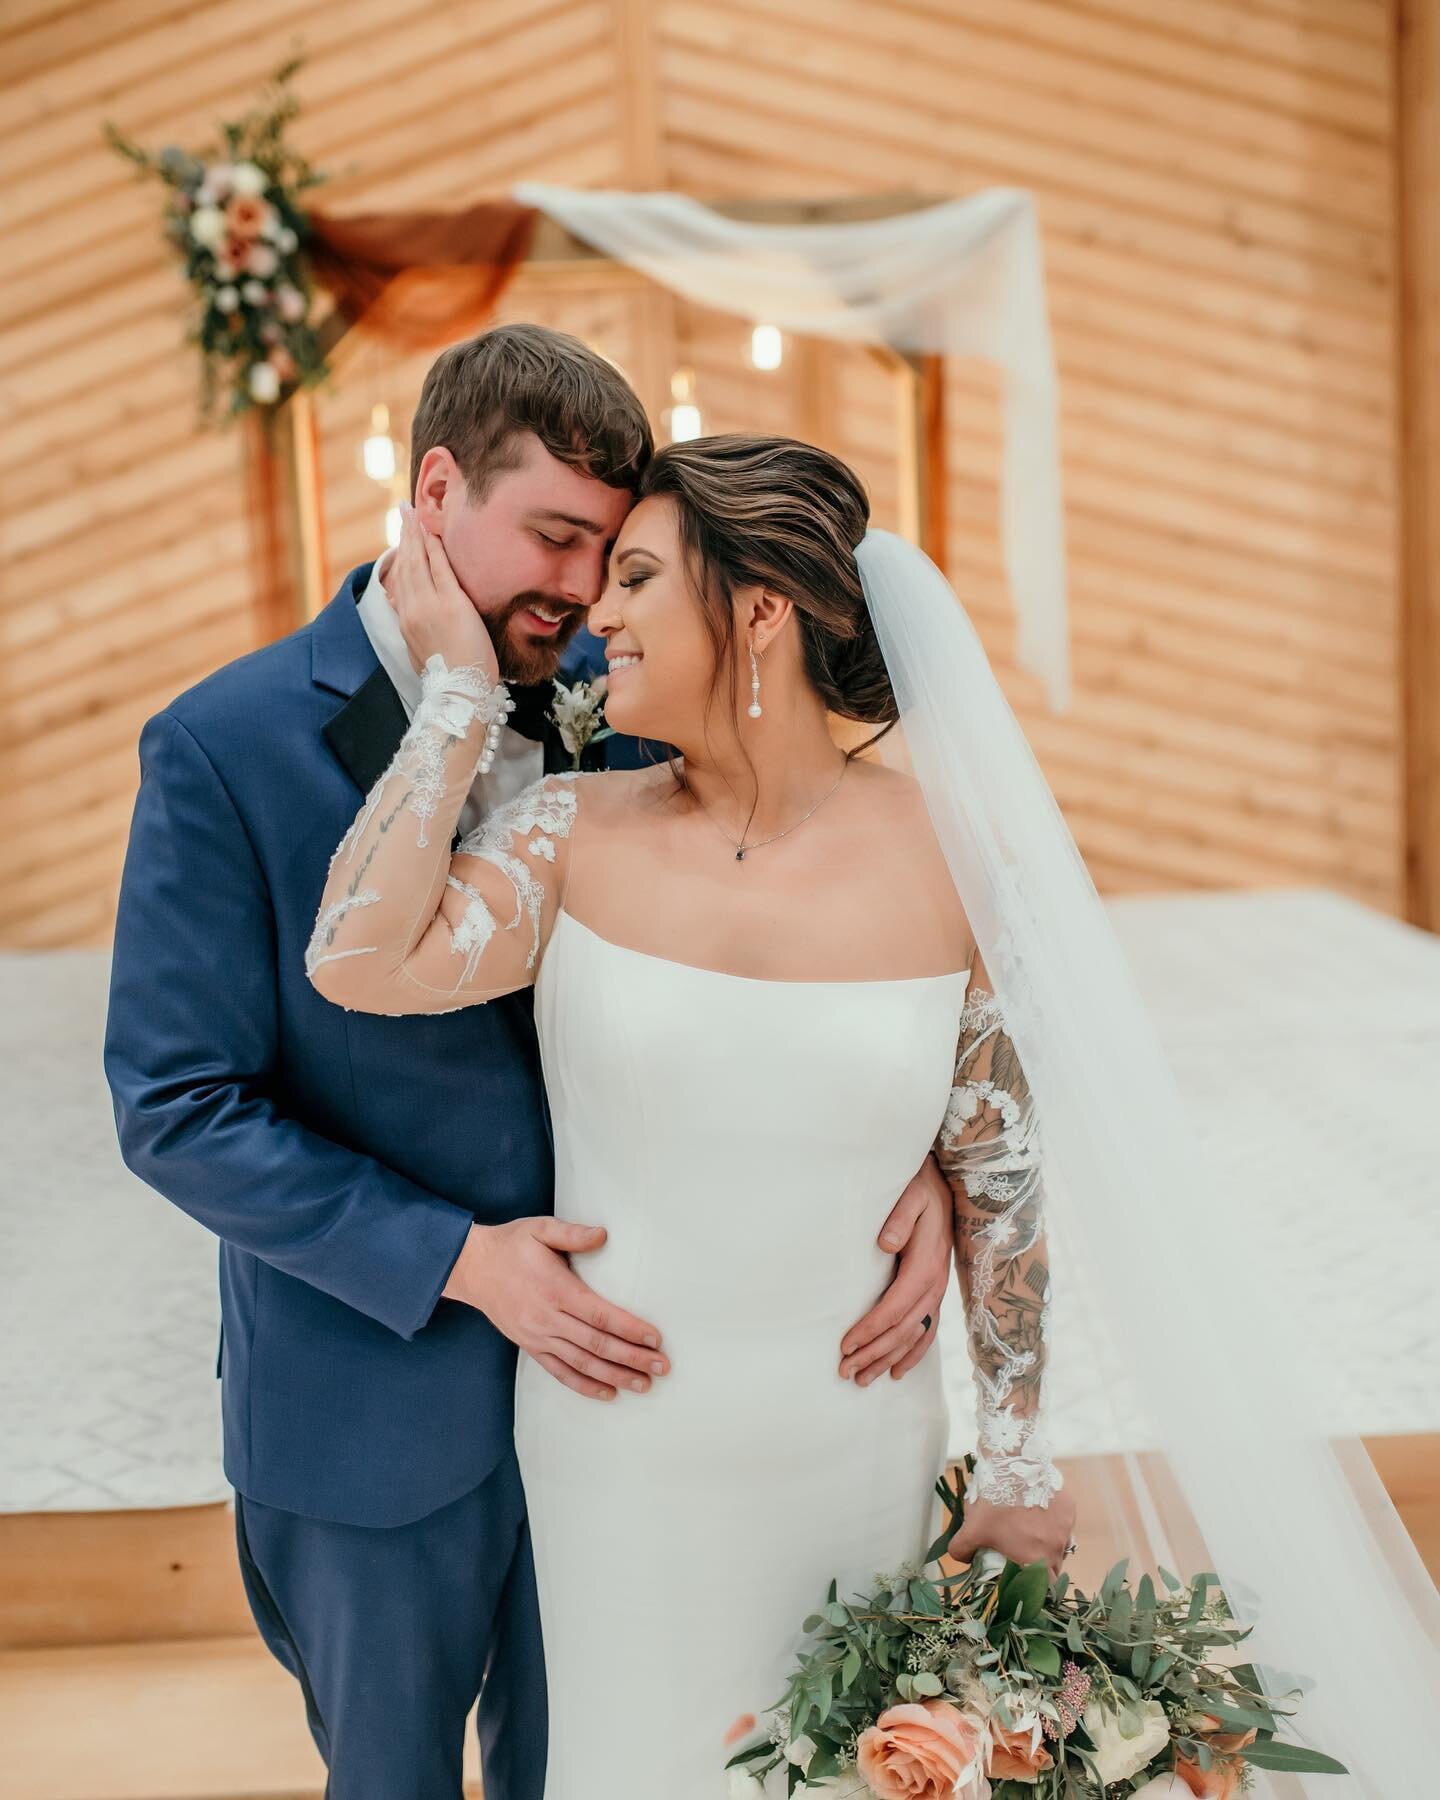 12.31.2022
&bull;
&bull;
Julia + Ryan 

We rang in the New Year with the best couple, along with their family and friends! Julia is a special one as she is one of our associate planners and being able to help make her wedding day dreams come true wil